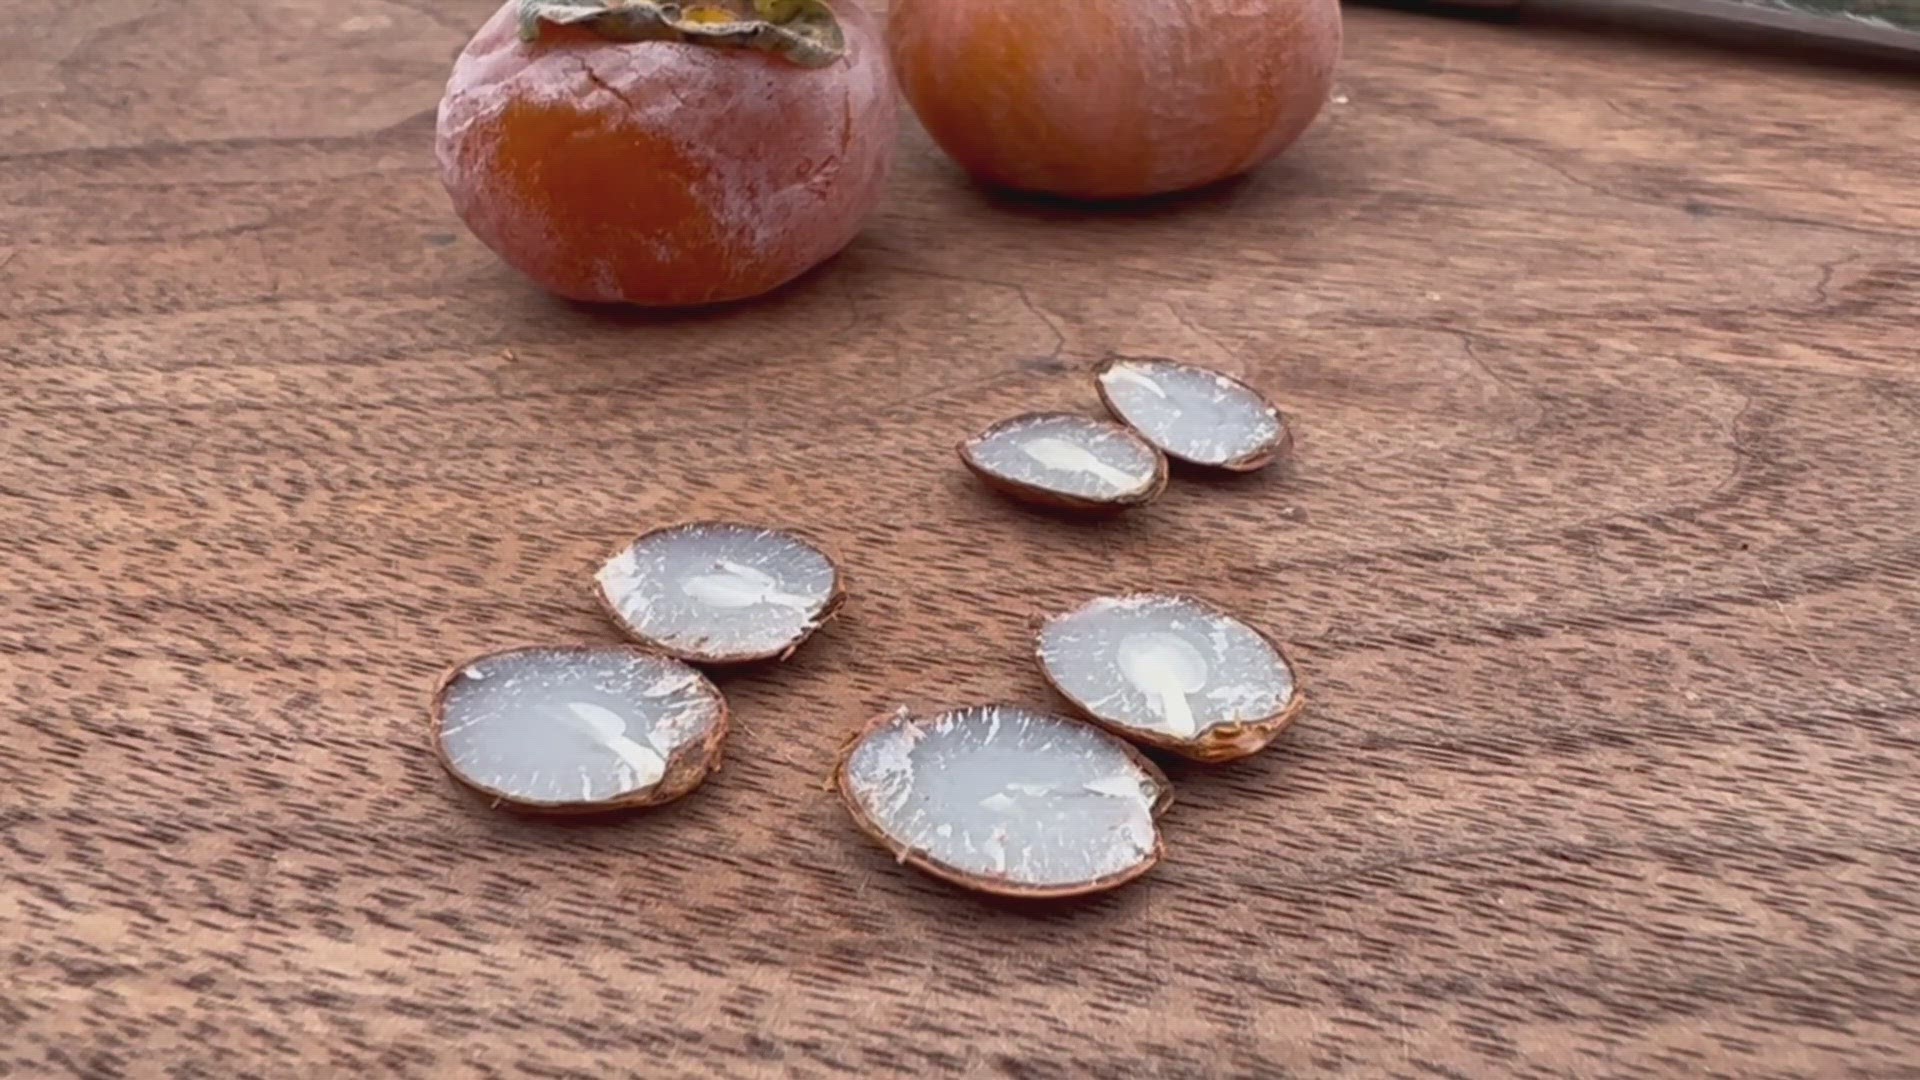 Meteorologists spend hours formulating a winter outlook, but a native fruit could cut that time in half. The lore behind persimmon seed forecasting is hard to trace.